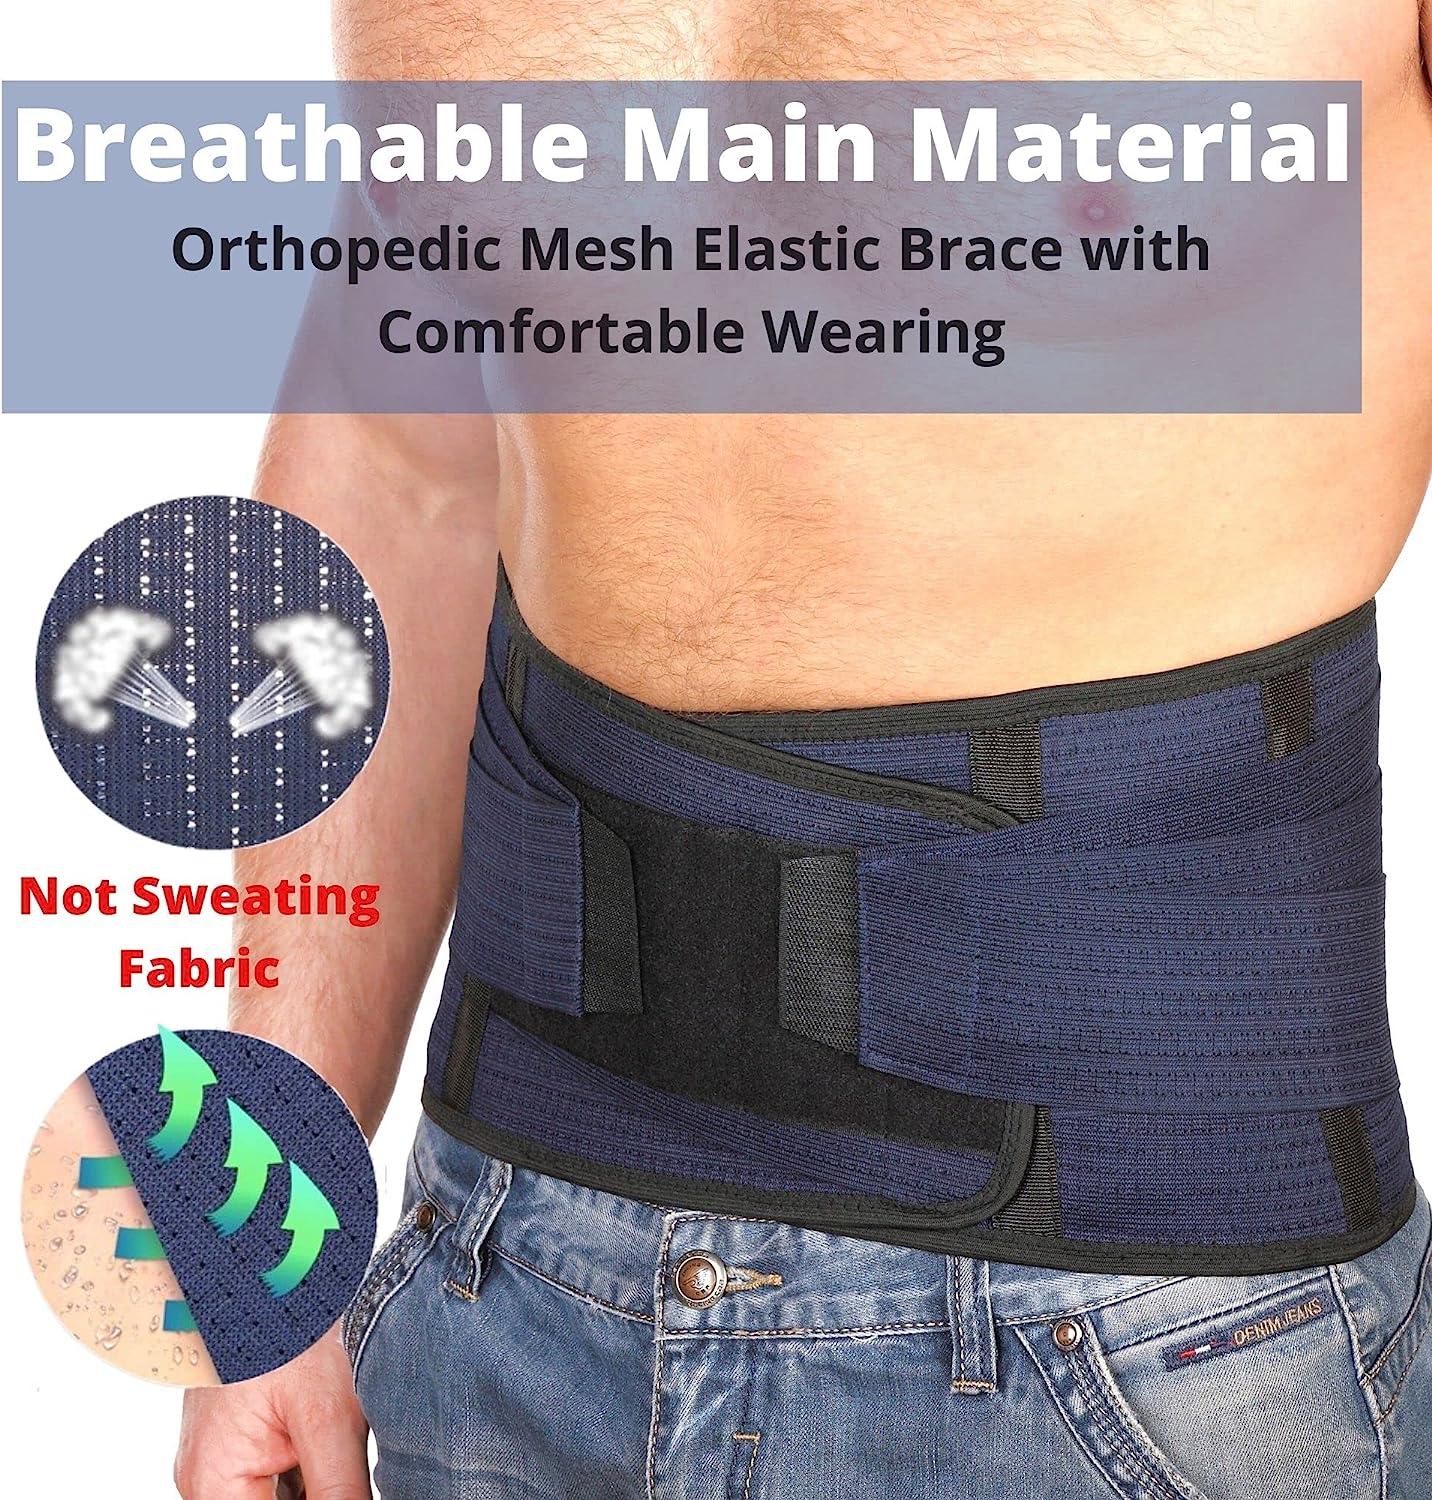 Buy AVESTON Back Brace for Lower Back Pain Relief 6 ribs Belt with